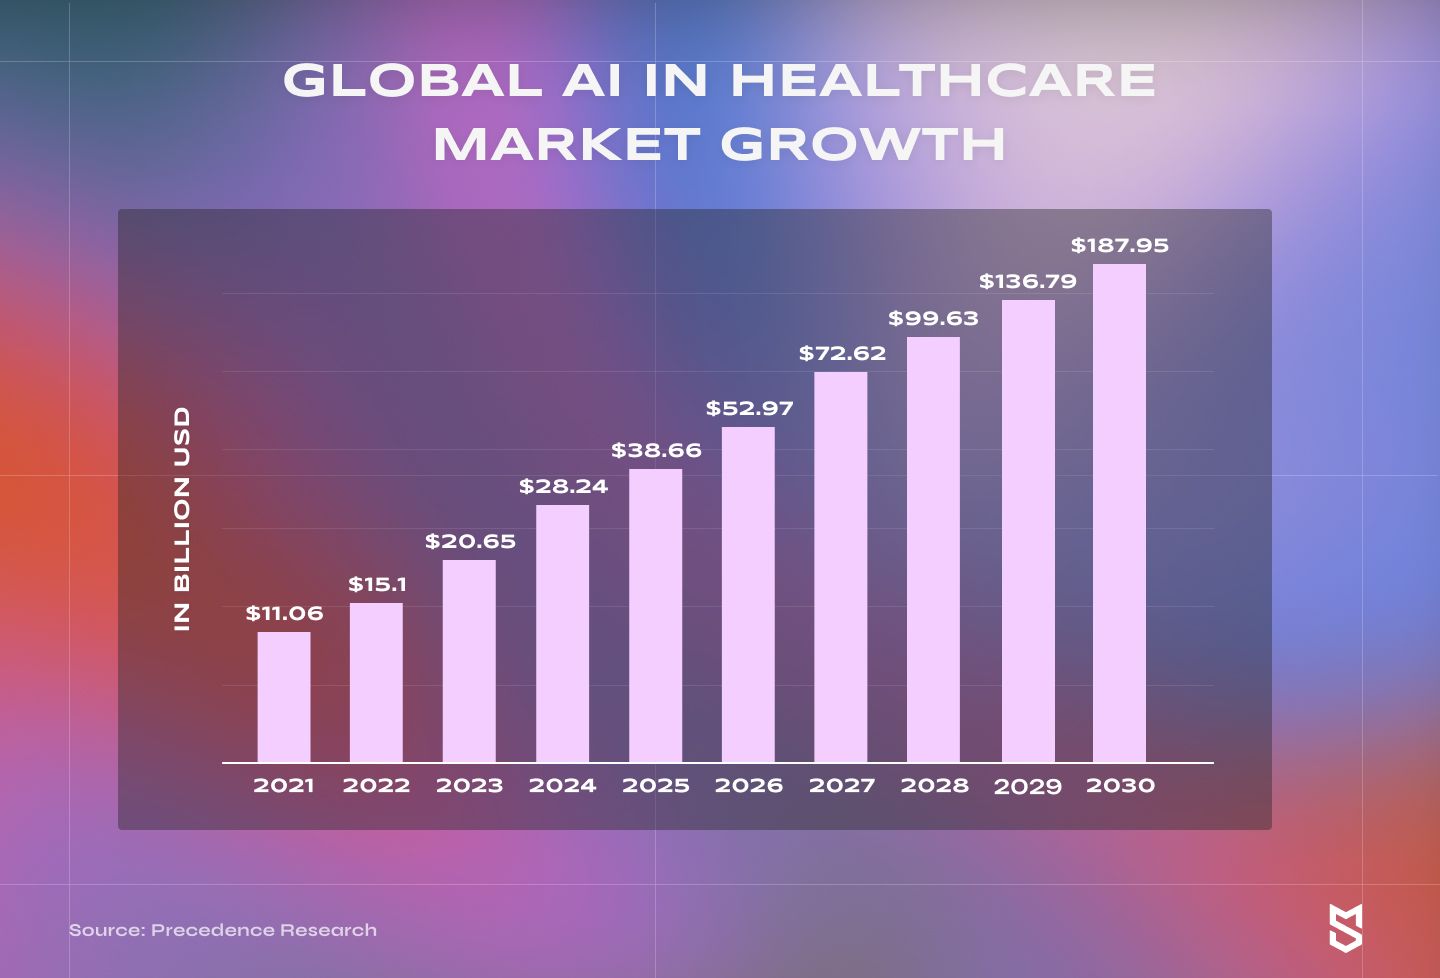 Global AI in healthcare market growth